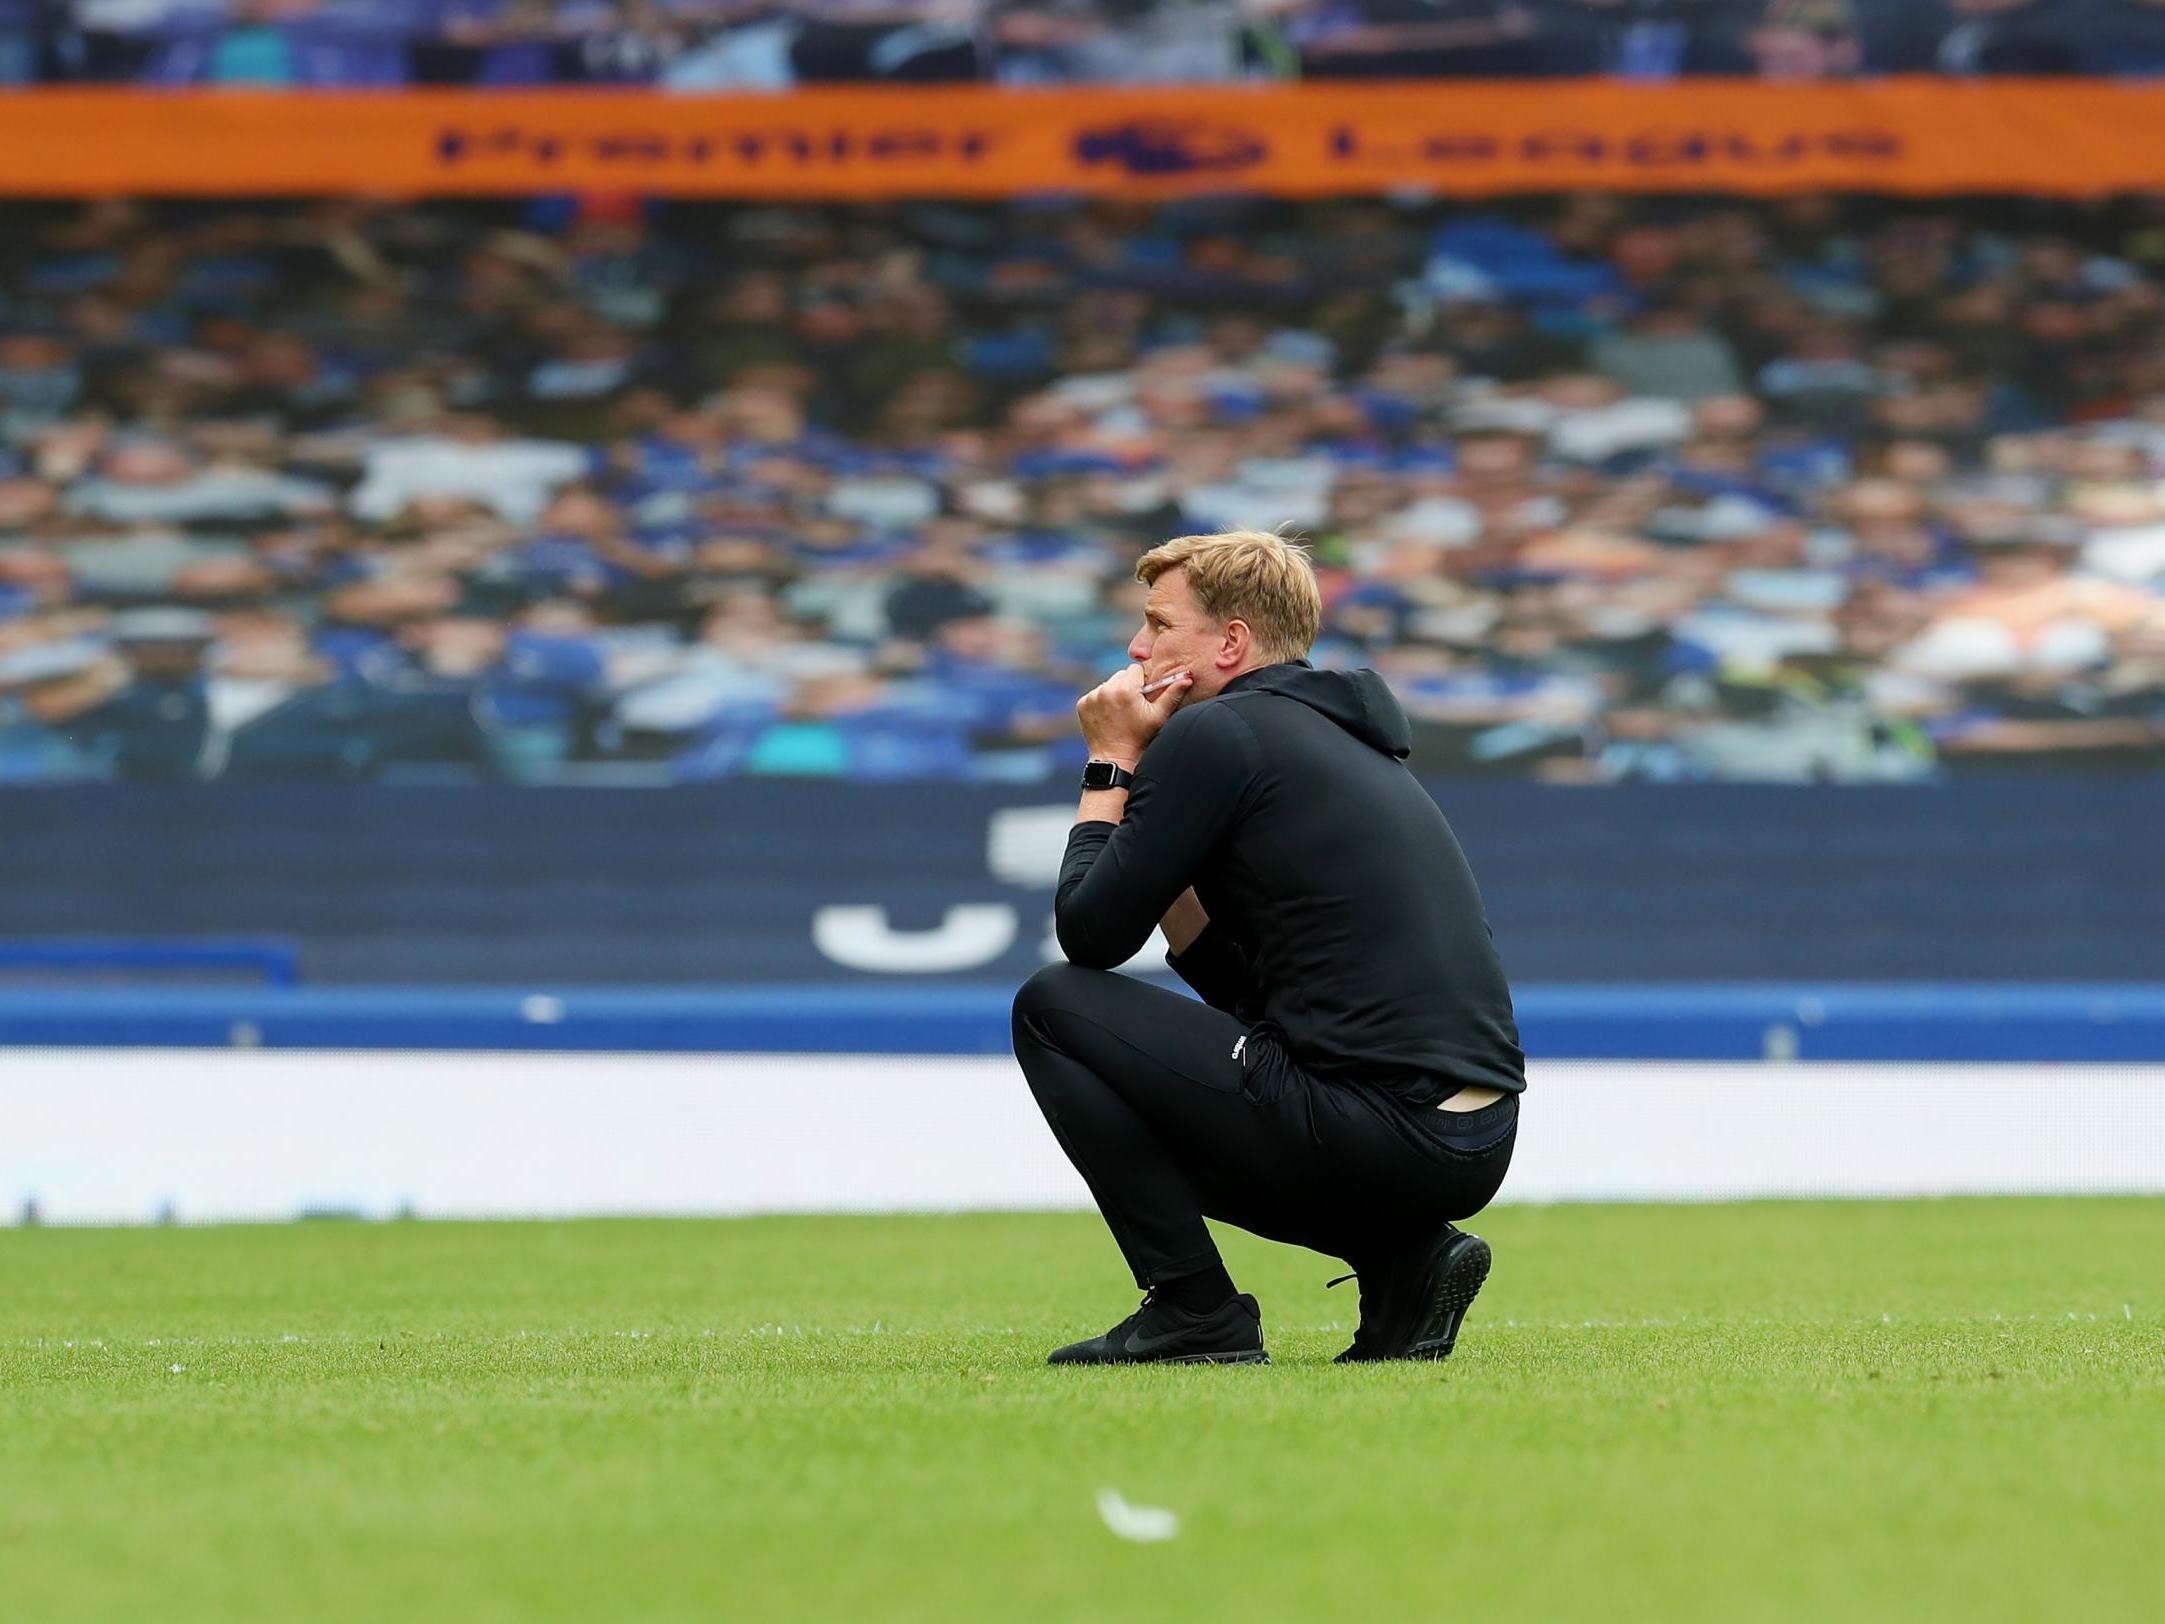 Bournemouth manager Eddie Howe unsure of future as Cherries relegated from Premier League